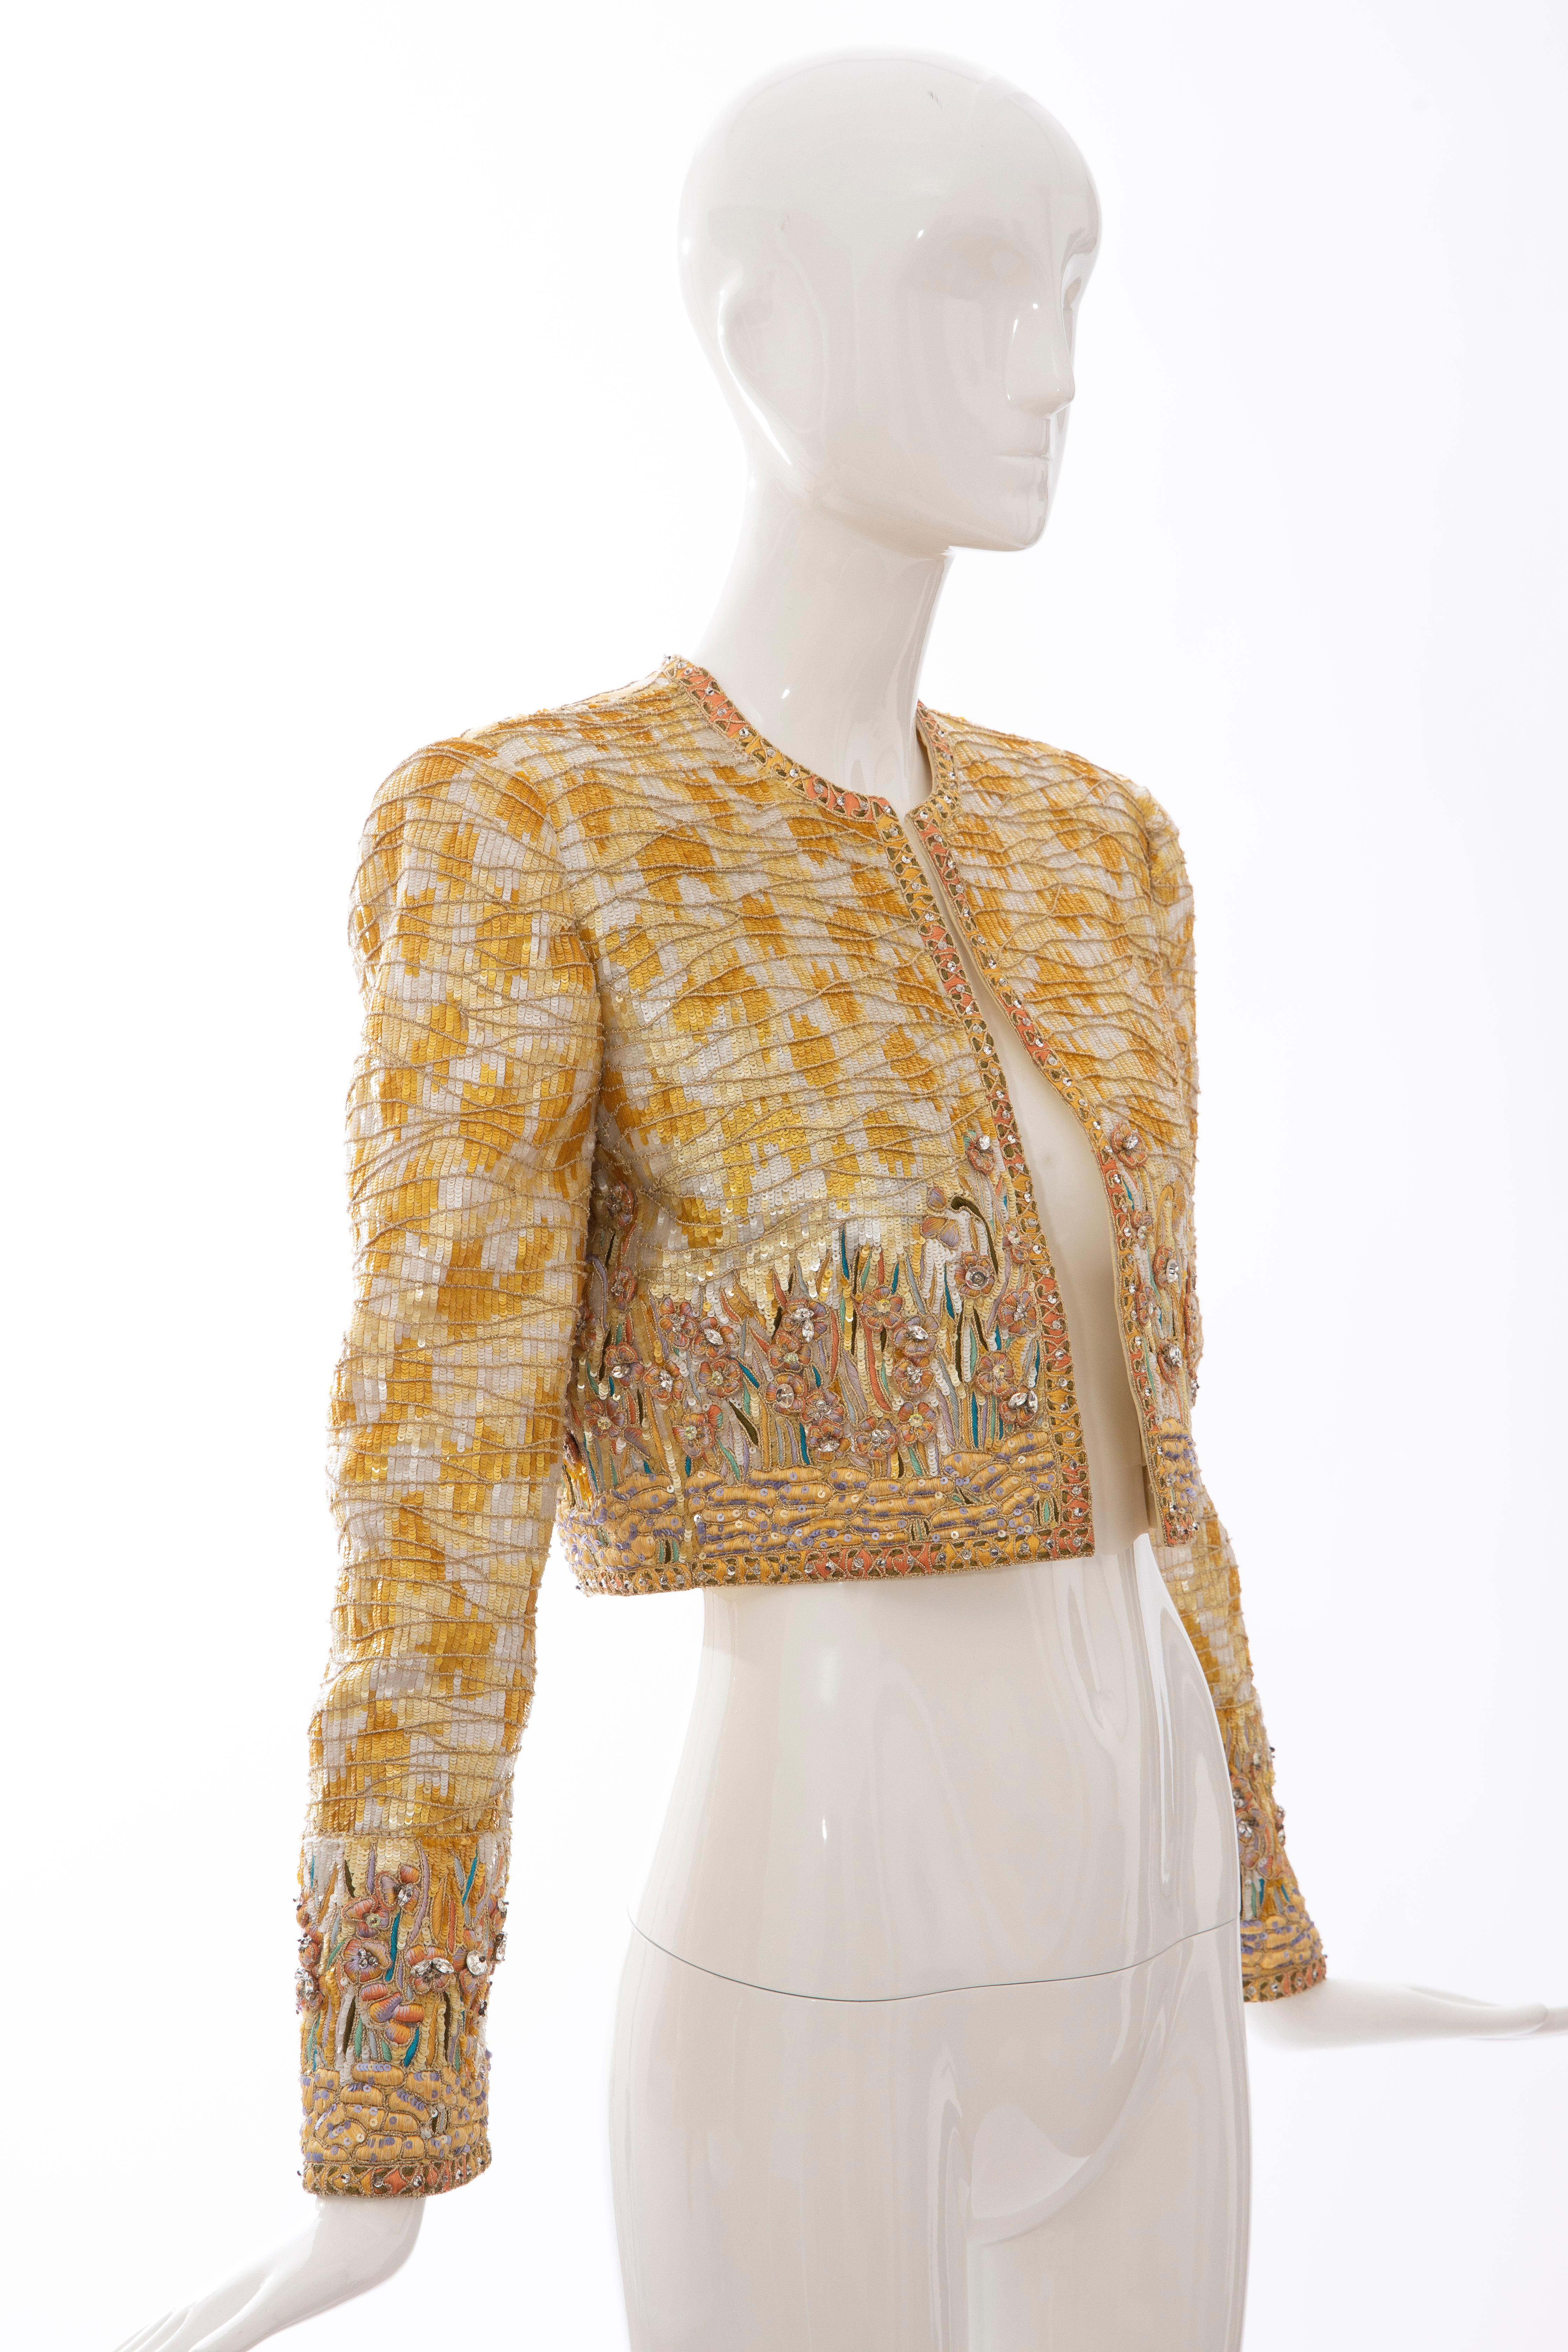 Brown Mary McFadden Couture Silk Embroidered Sequins Diamanté Bolero Jacket, ca. 1980's For Sale